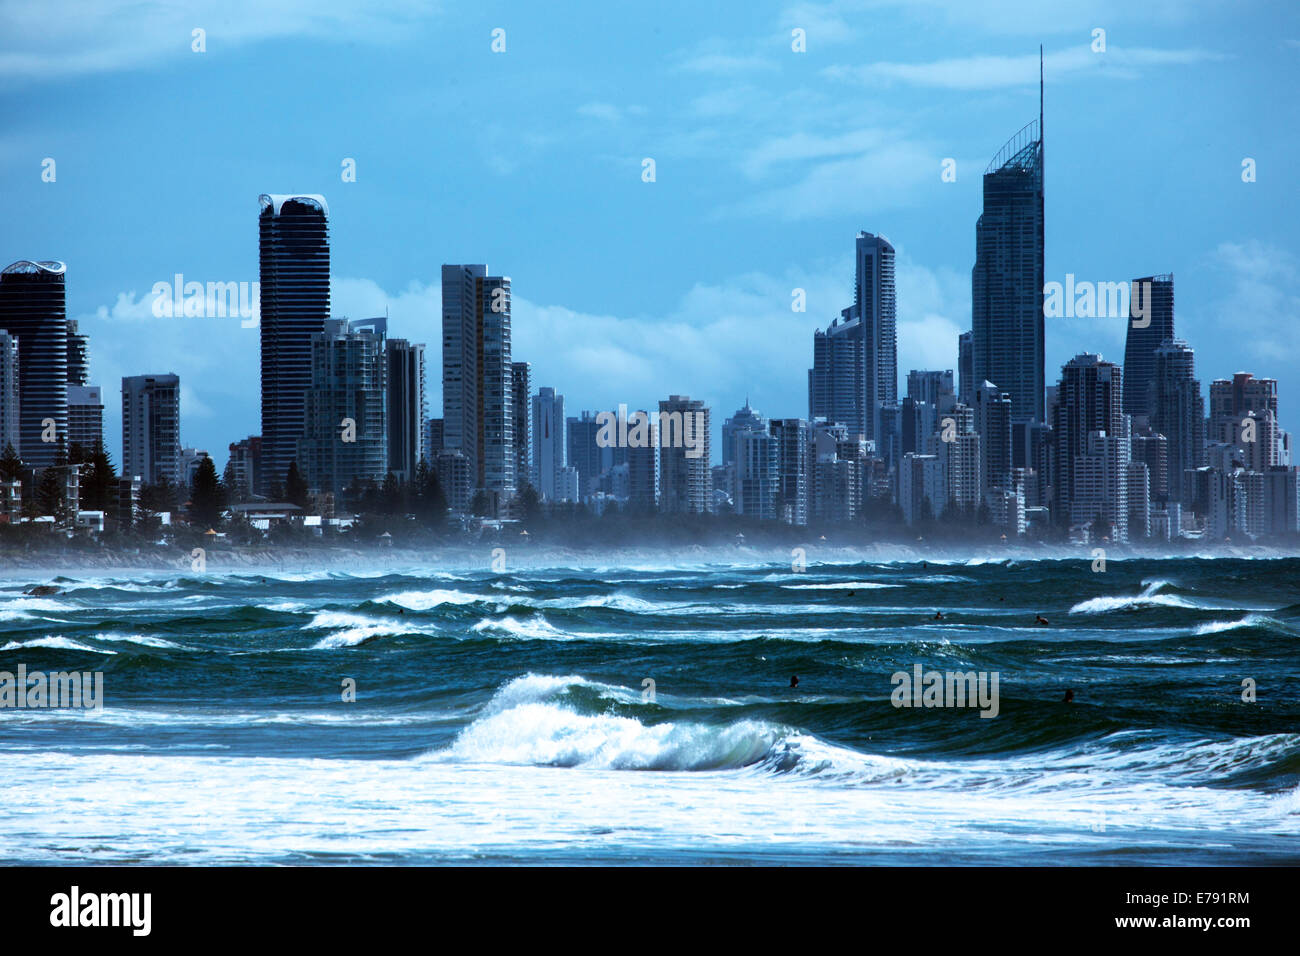 Looking across the Pacific Ocean towards the high rise buildings of Surfers Paradise in Australia Stock Photo